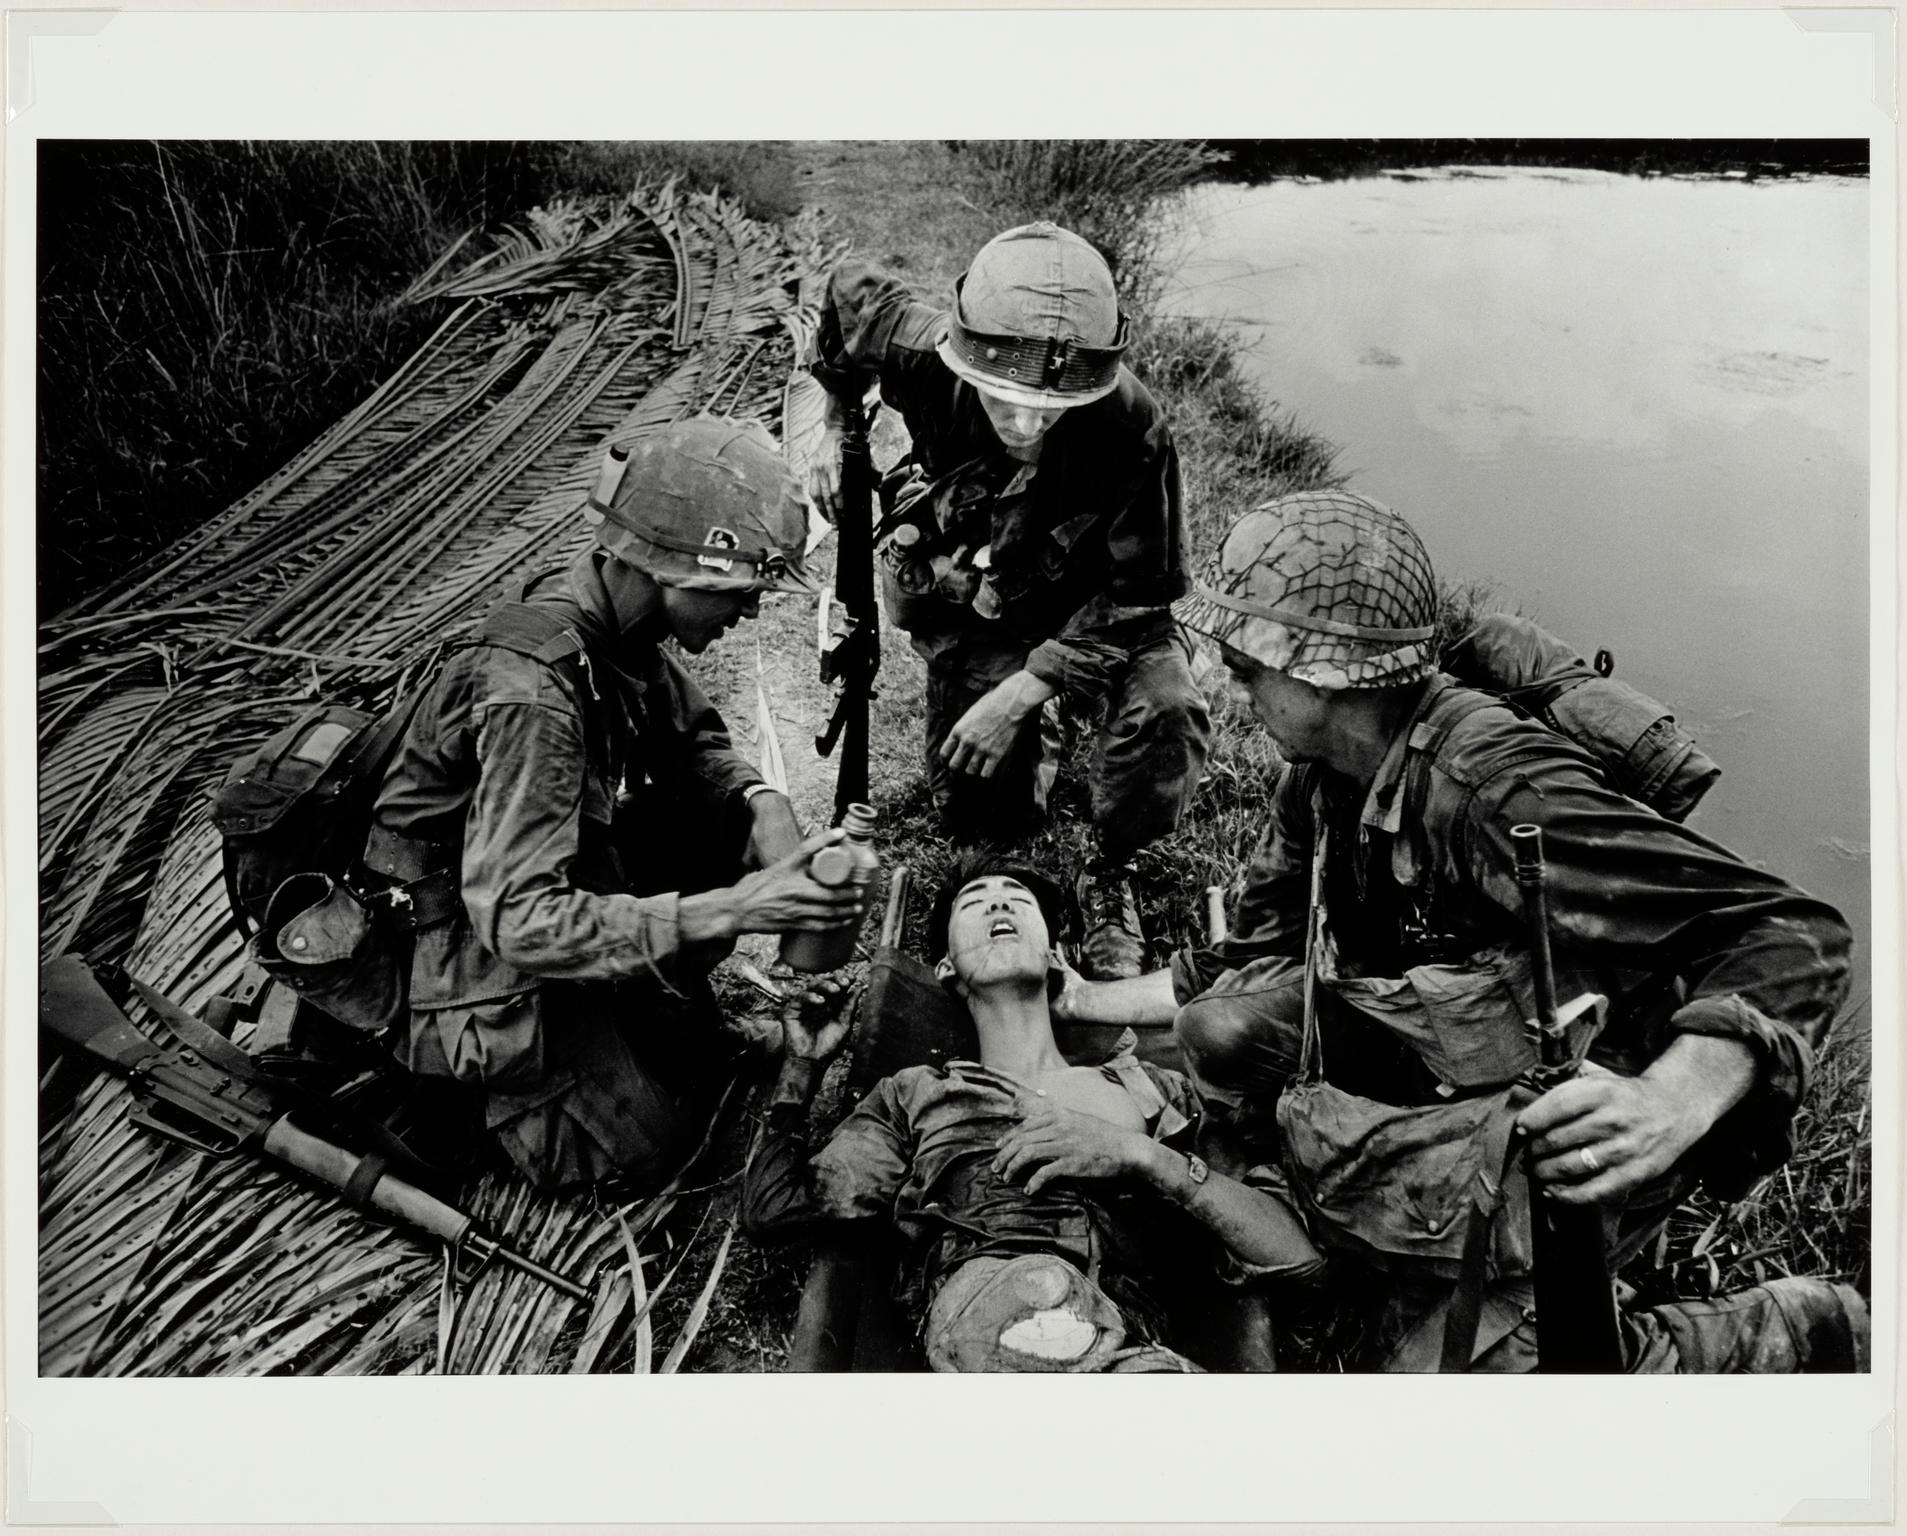 G.I.'s with wounded Vietcong, 1968